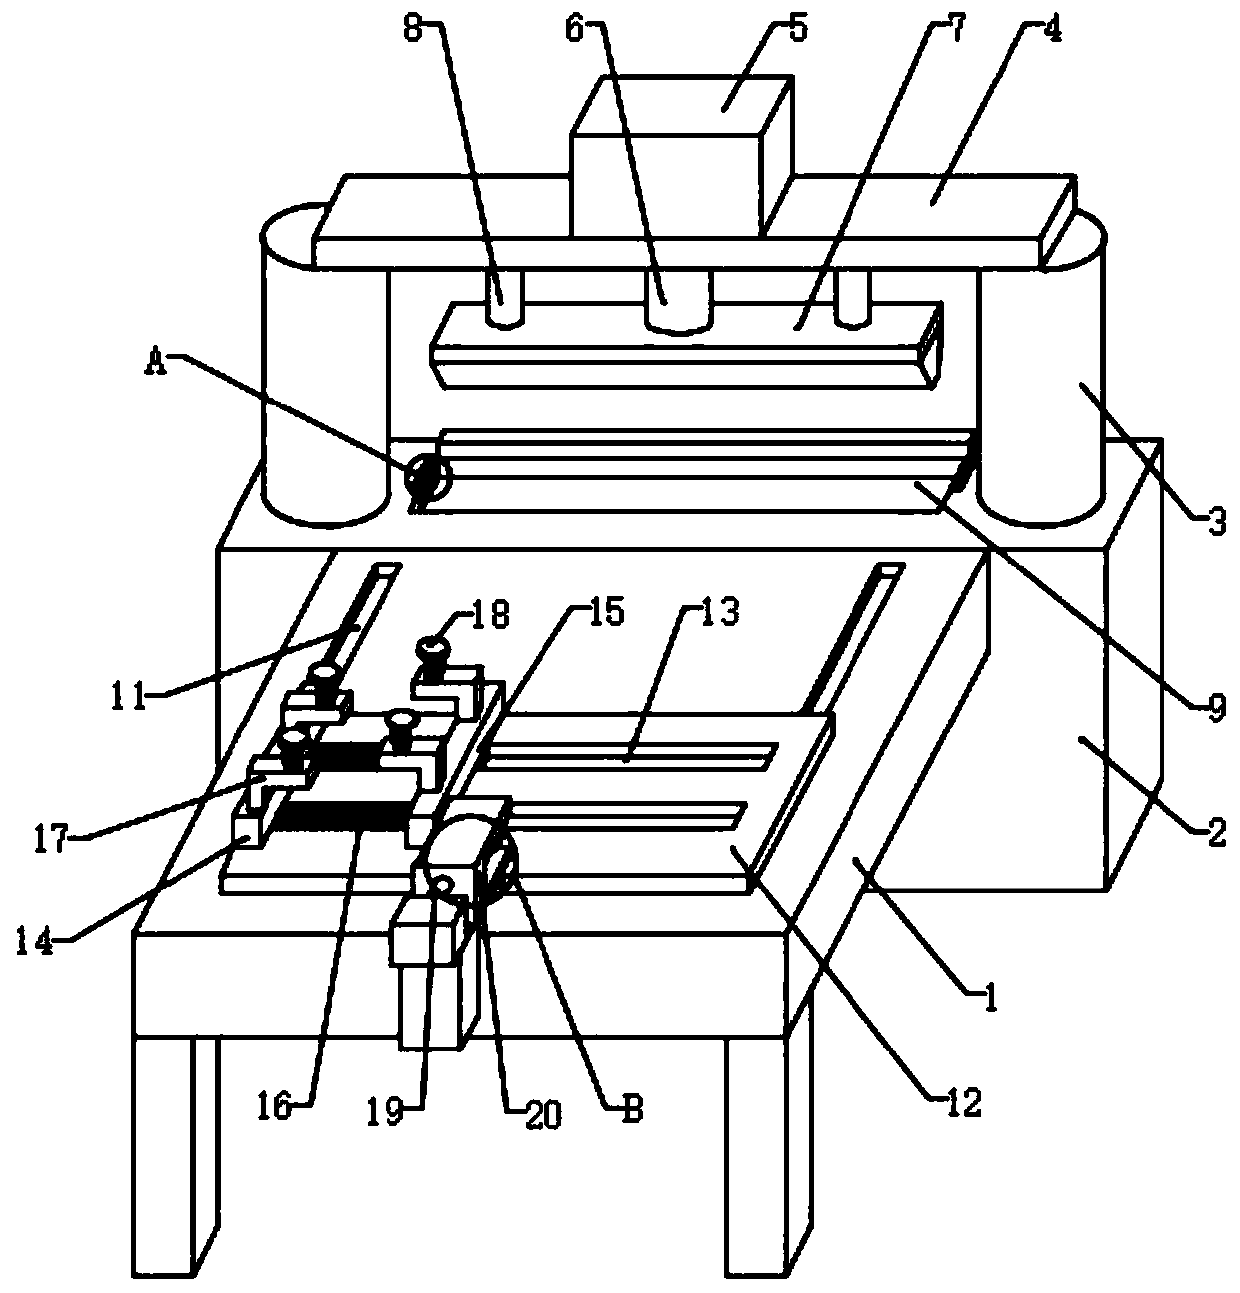 A multi-point fixing device for a thick metal plate bending machine